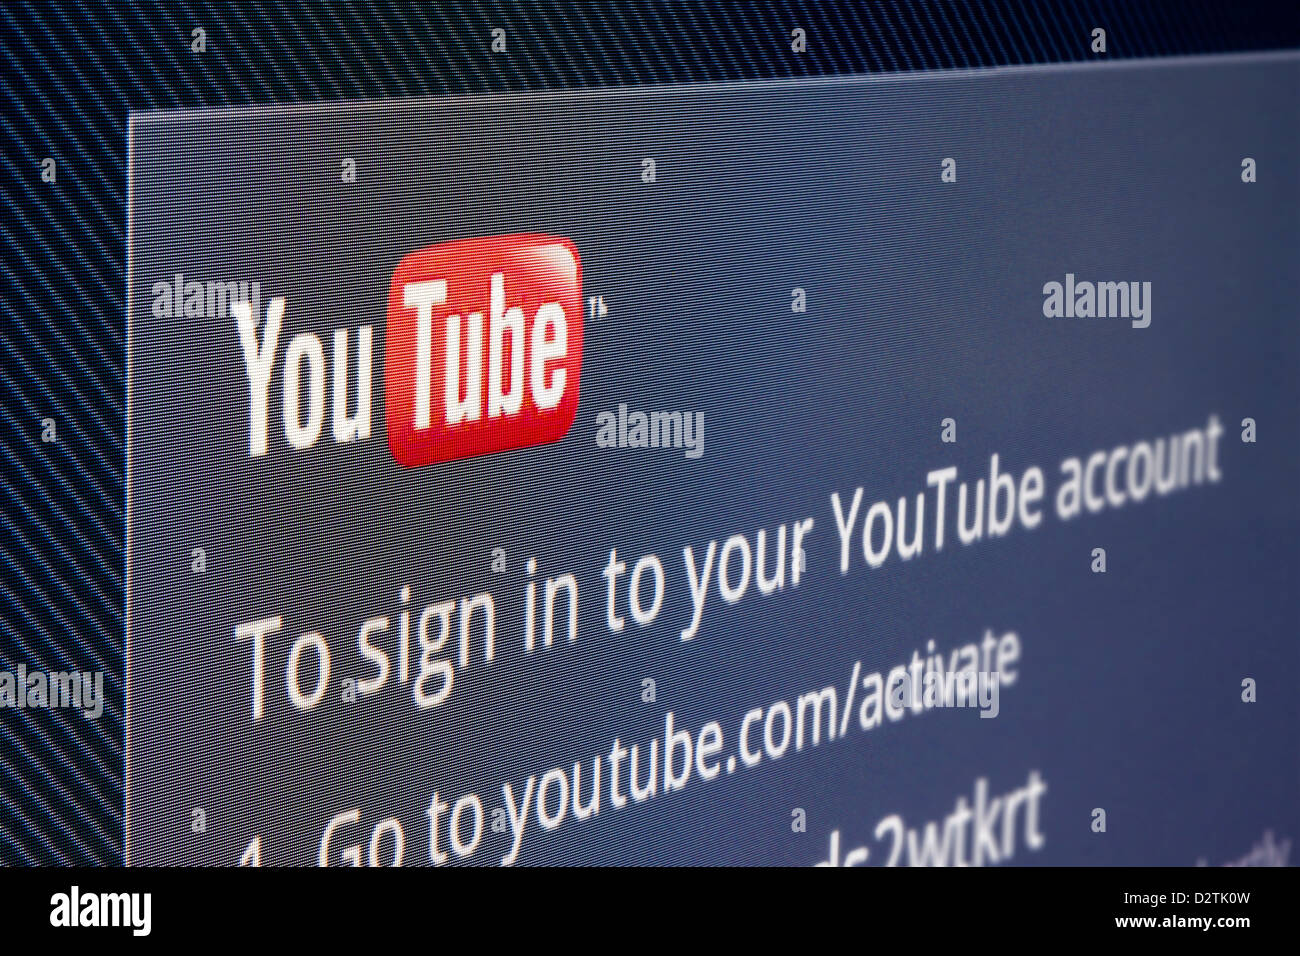 YouTube app icon on a Tv screen. YouTube is the World's most acknowledged video sharing site, established in 2005. Stock Photo